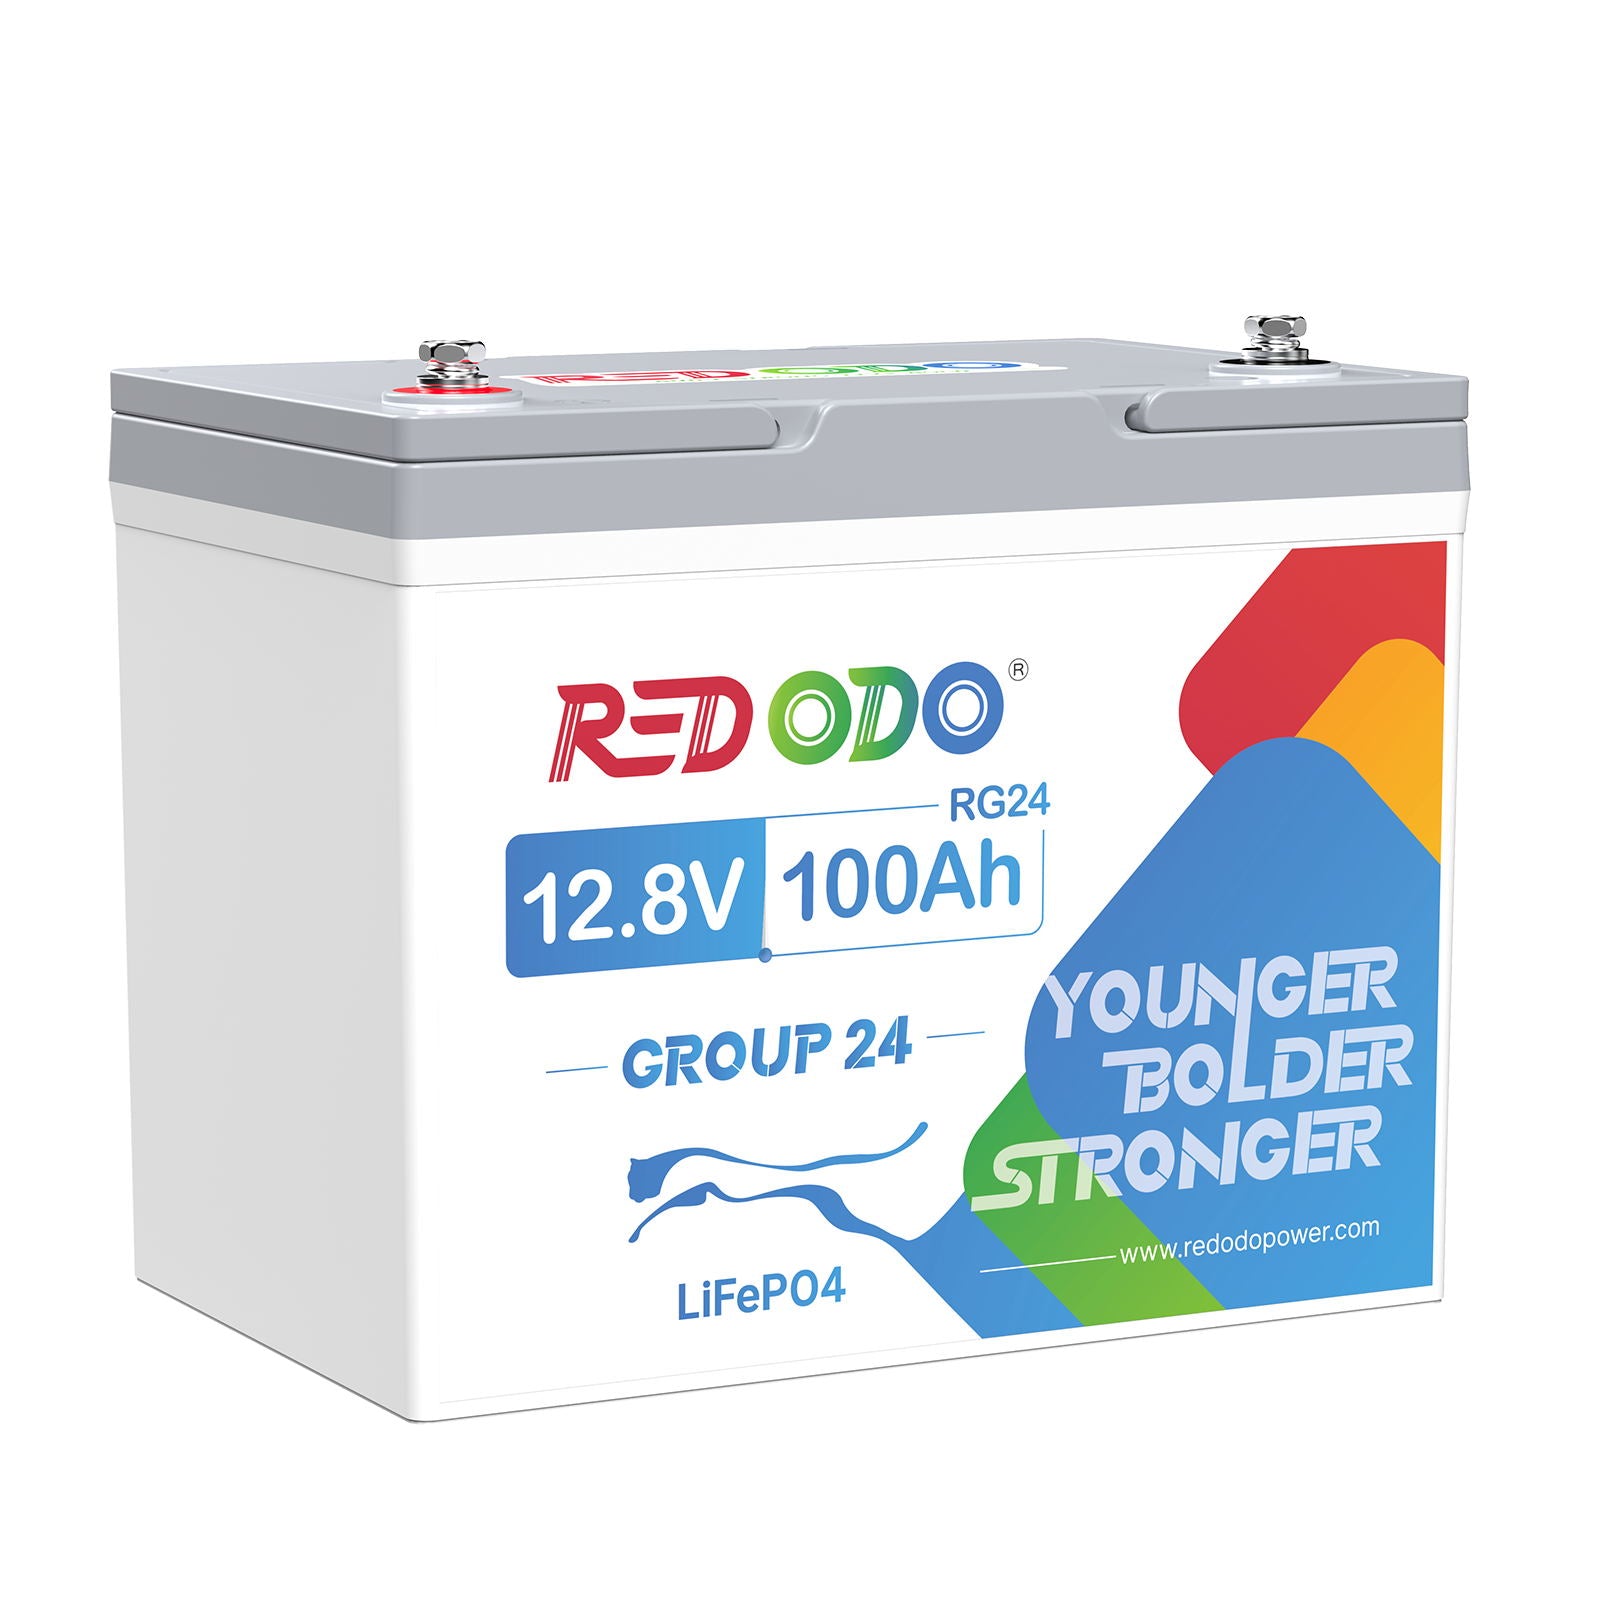 【Only $233】Redodo 12V 100Ah group 24 Deep Cycle Battery Redodo Power